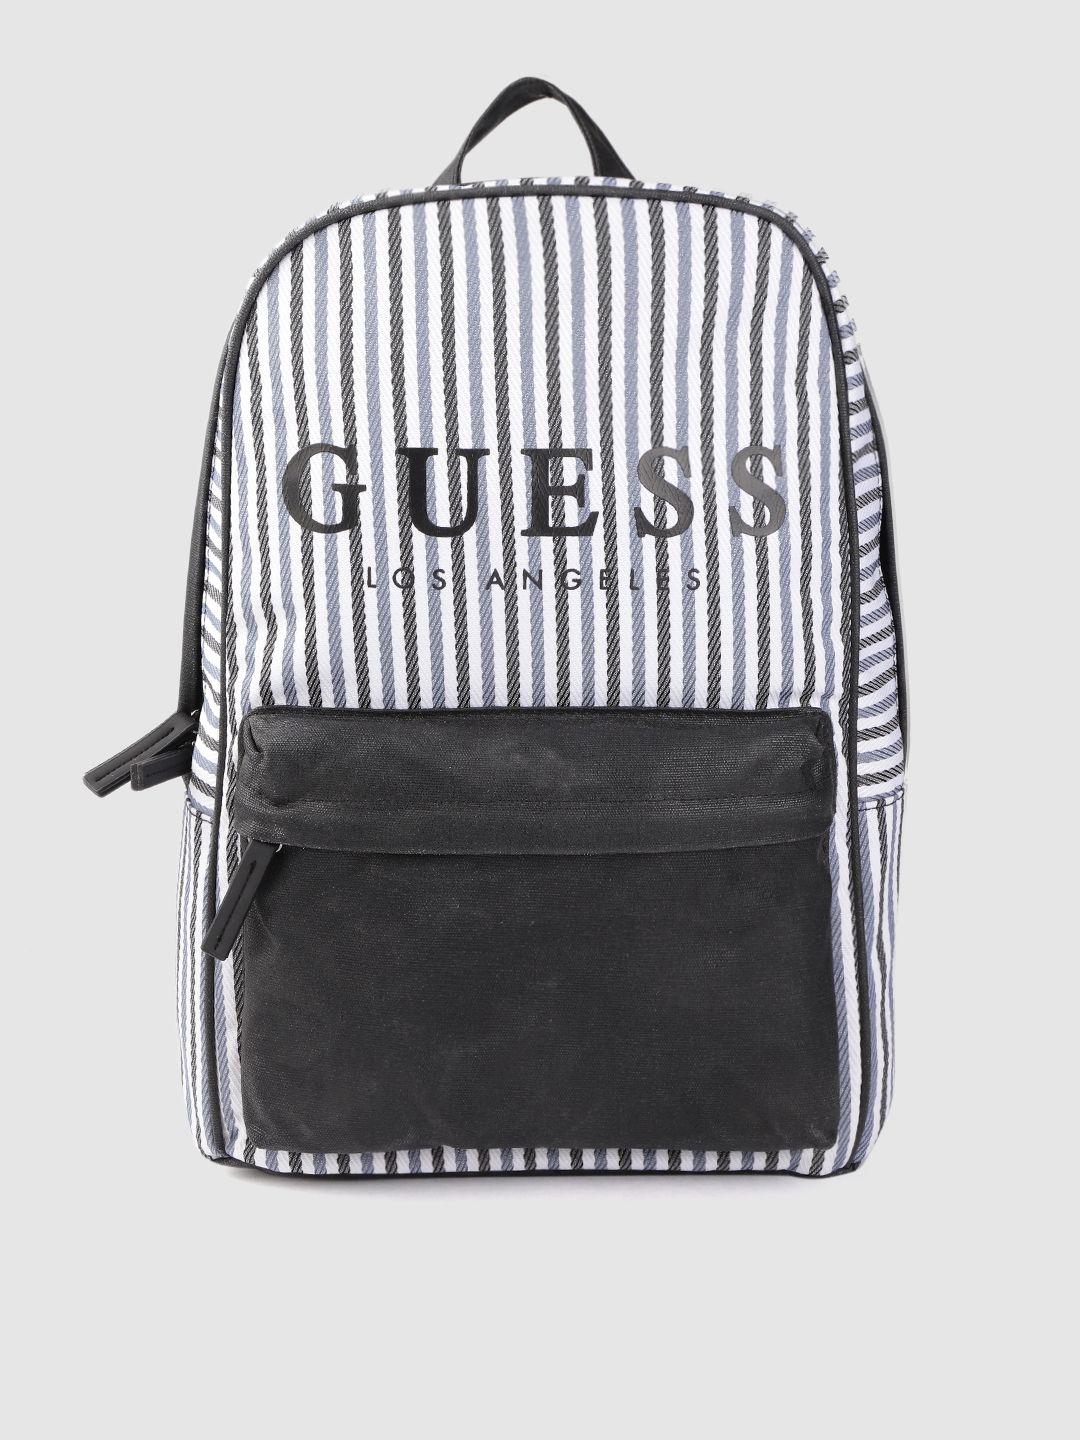 guess women black & blue striped 14 inch laptop backpack